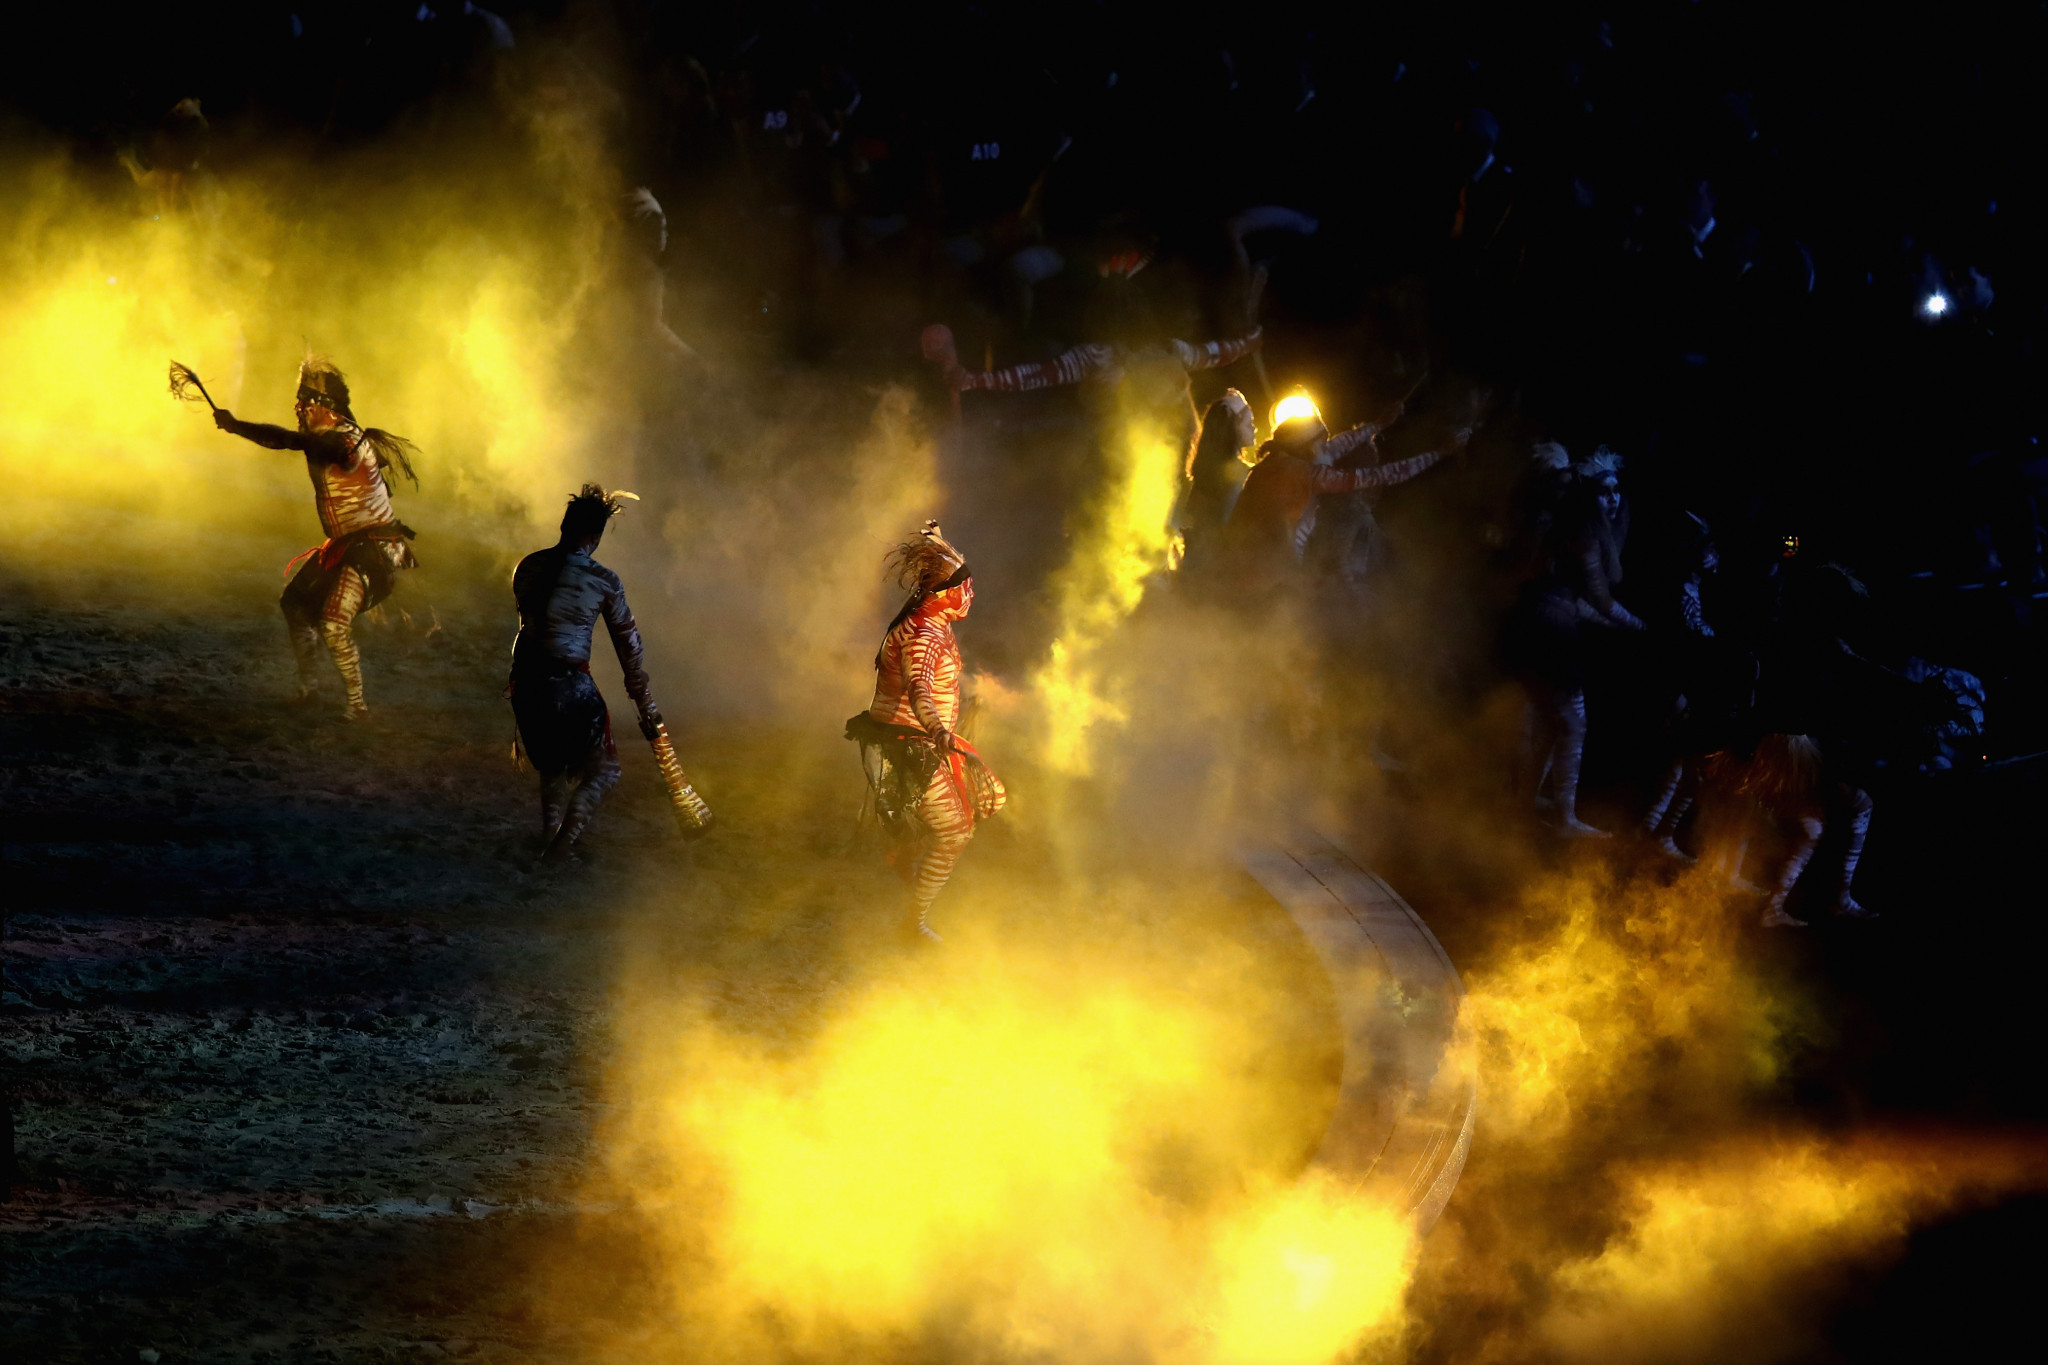 A traditional smoking ceremony also took place during the spectacle ©Getty Images